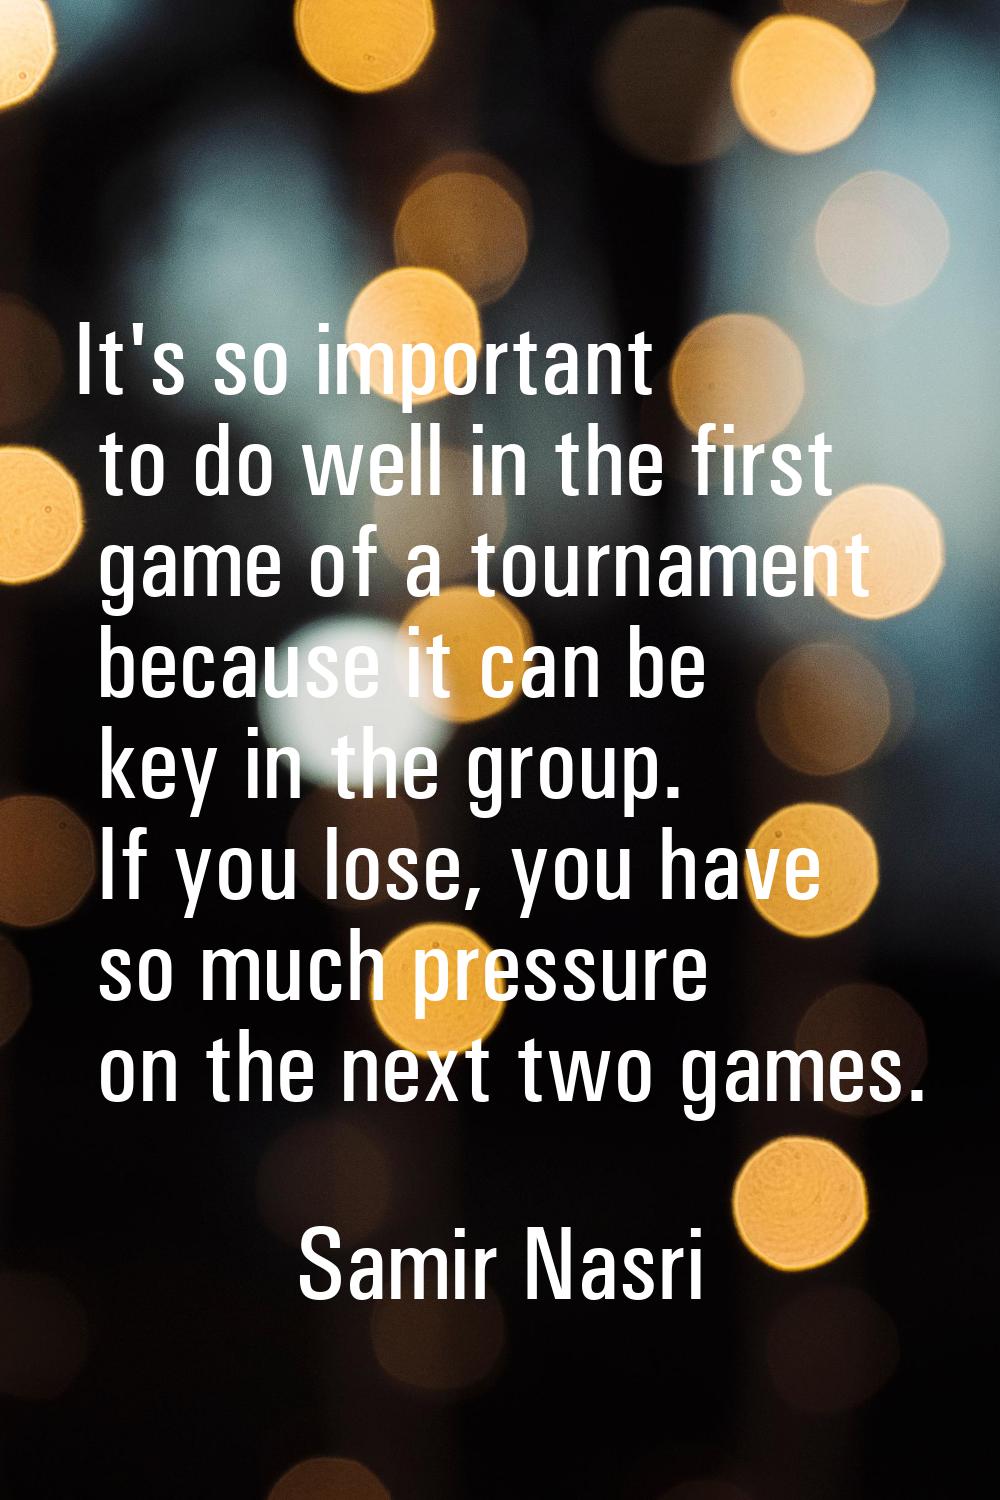 It's so important to do well in the first game of a tournament because it can be key in the group. 